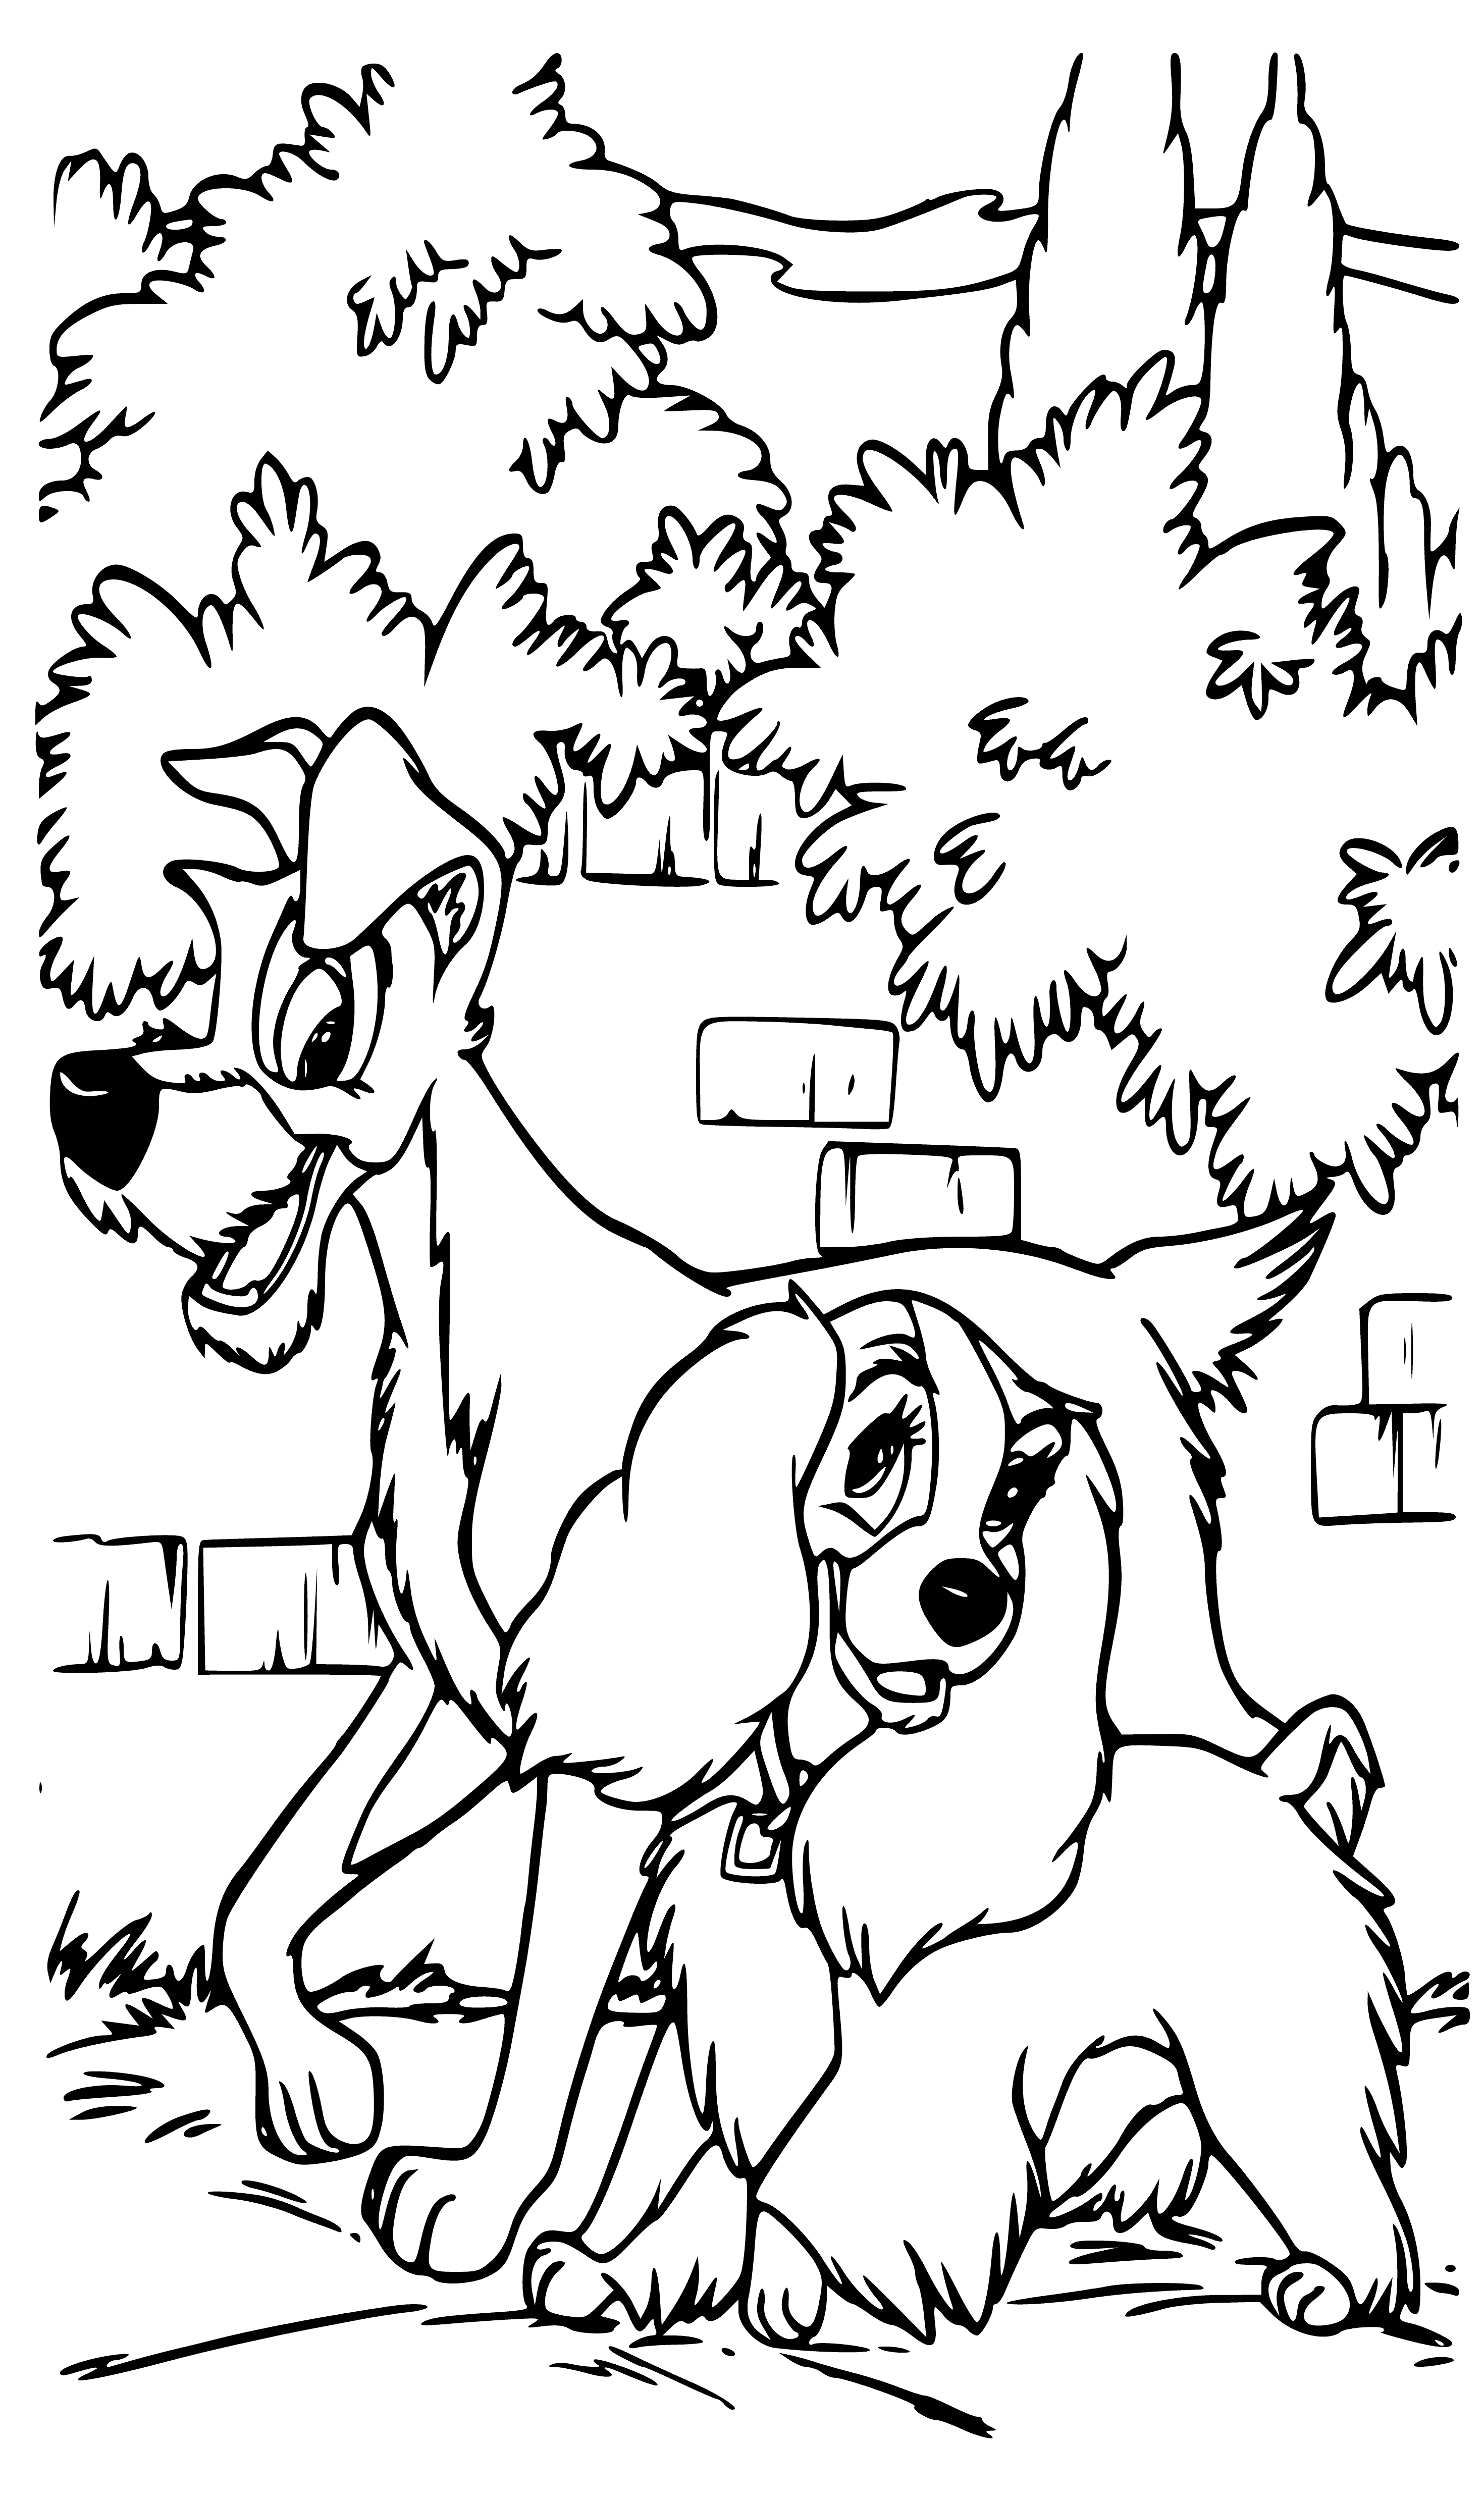 coloring page: A high-class lady and street-wise mutt fall in love and have an adventurous journey together.